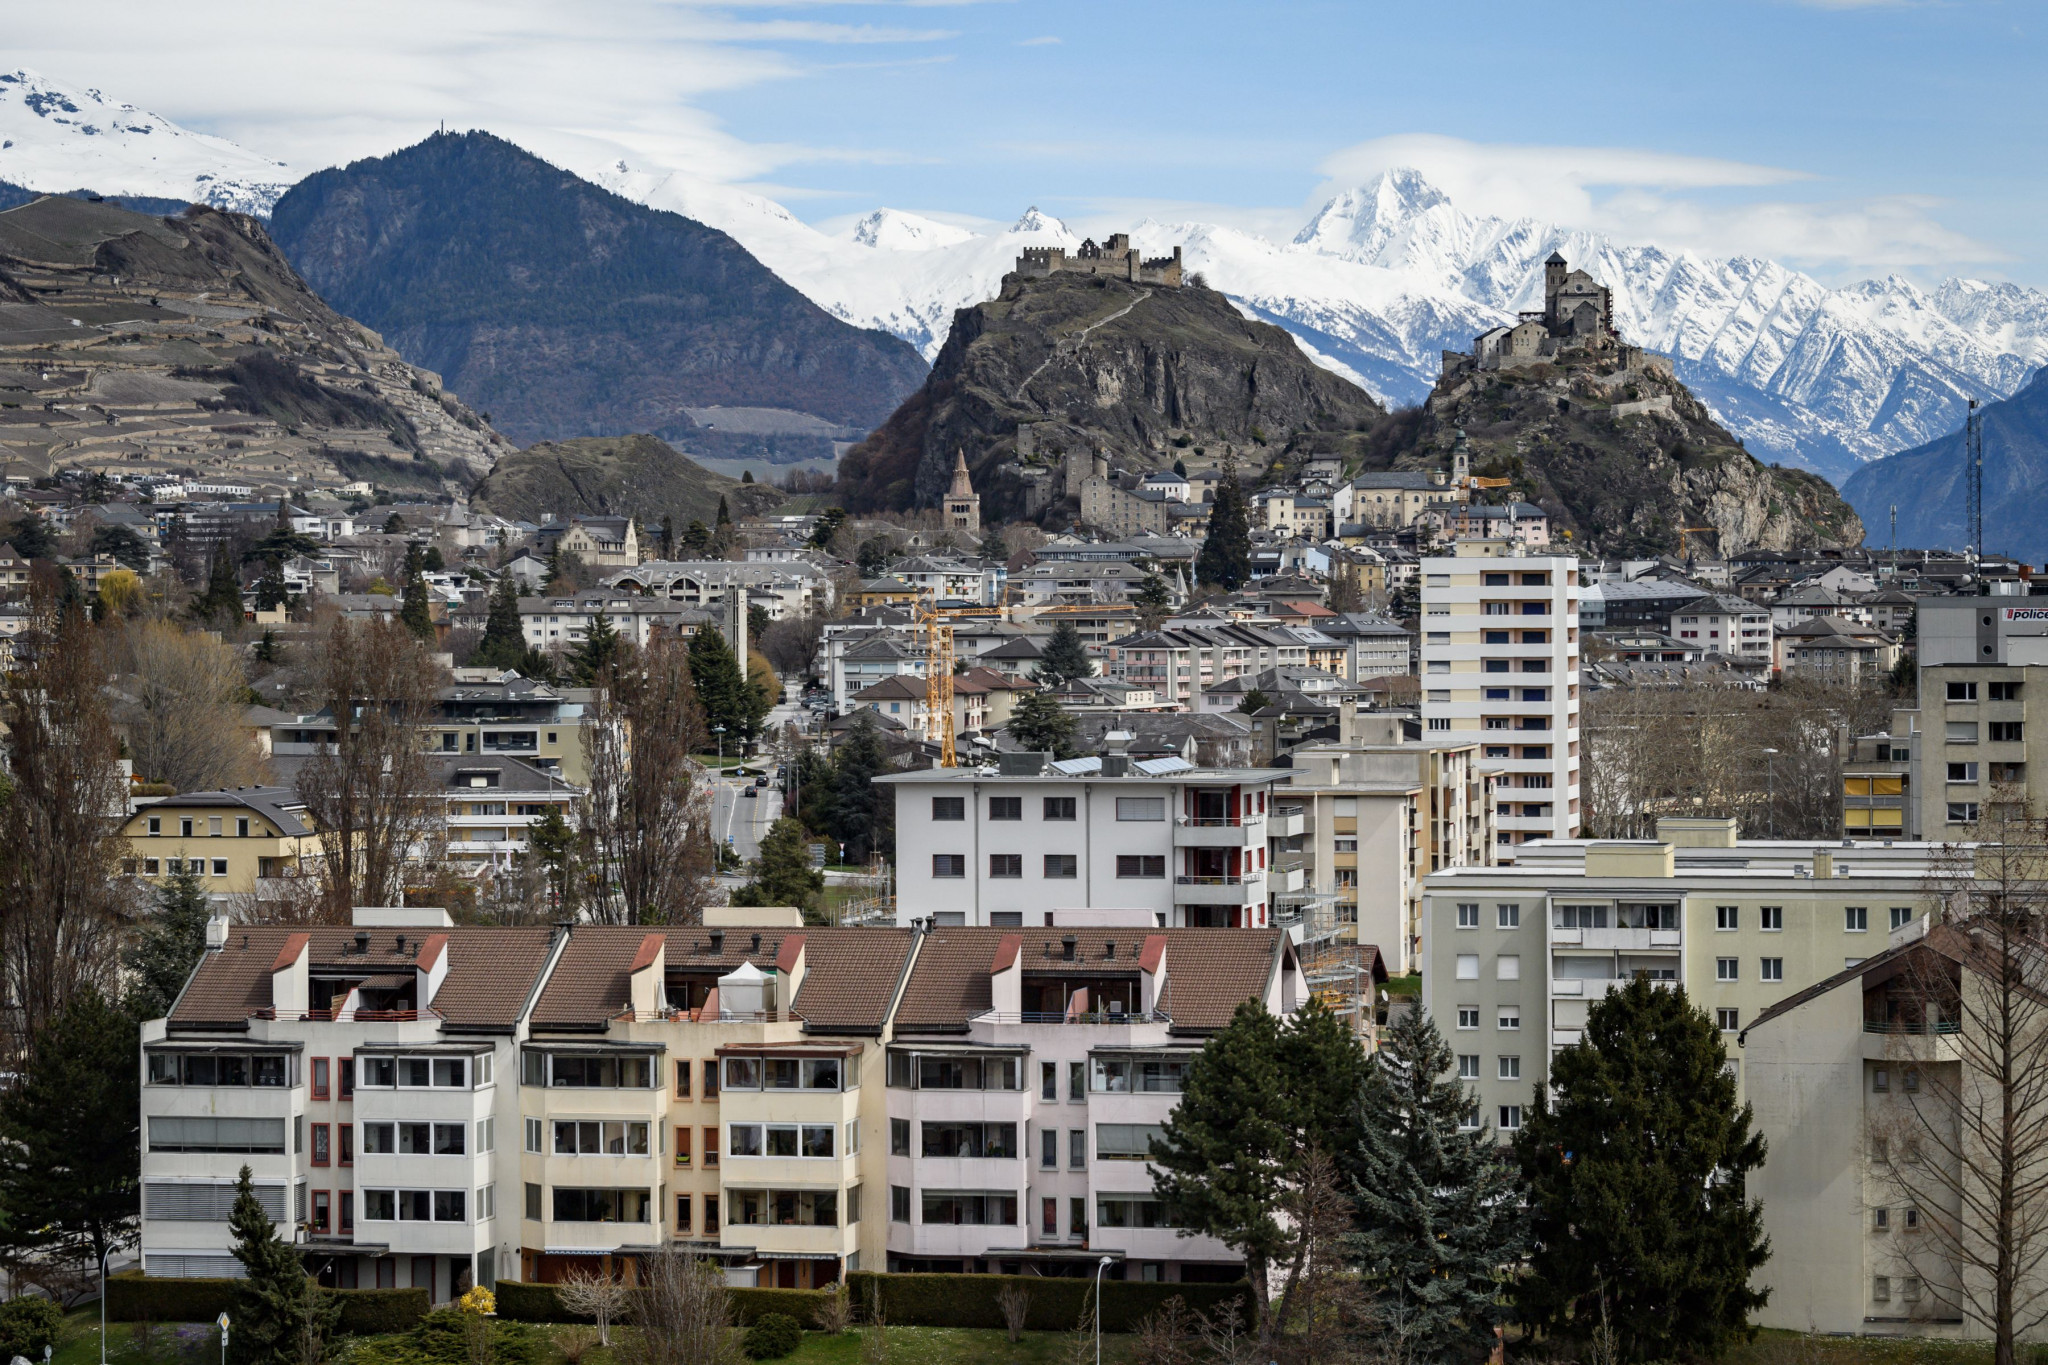 Voters will determine the future of the Sion 2026 bid tomorrow ©Getty Images